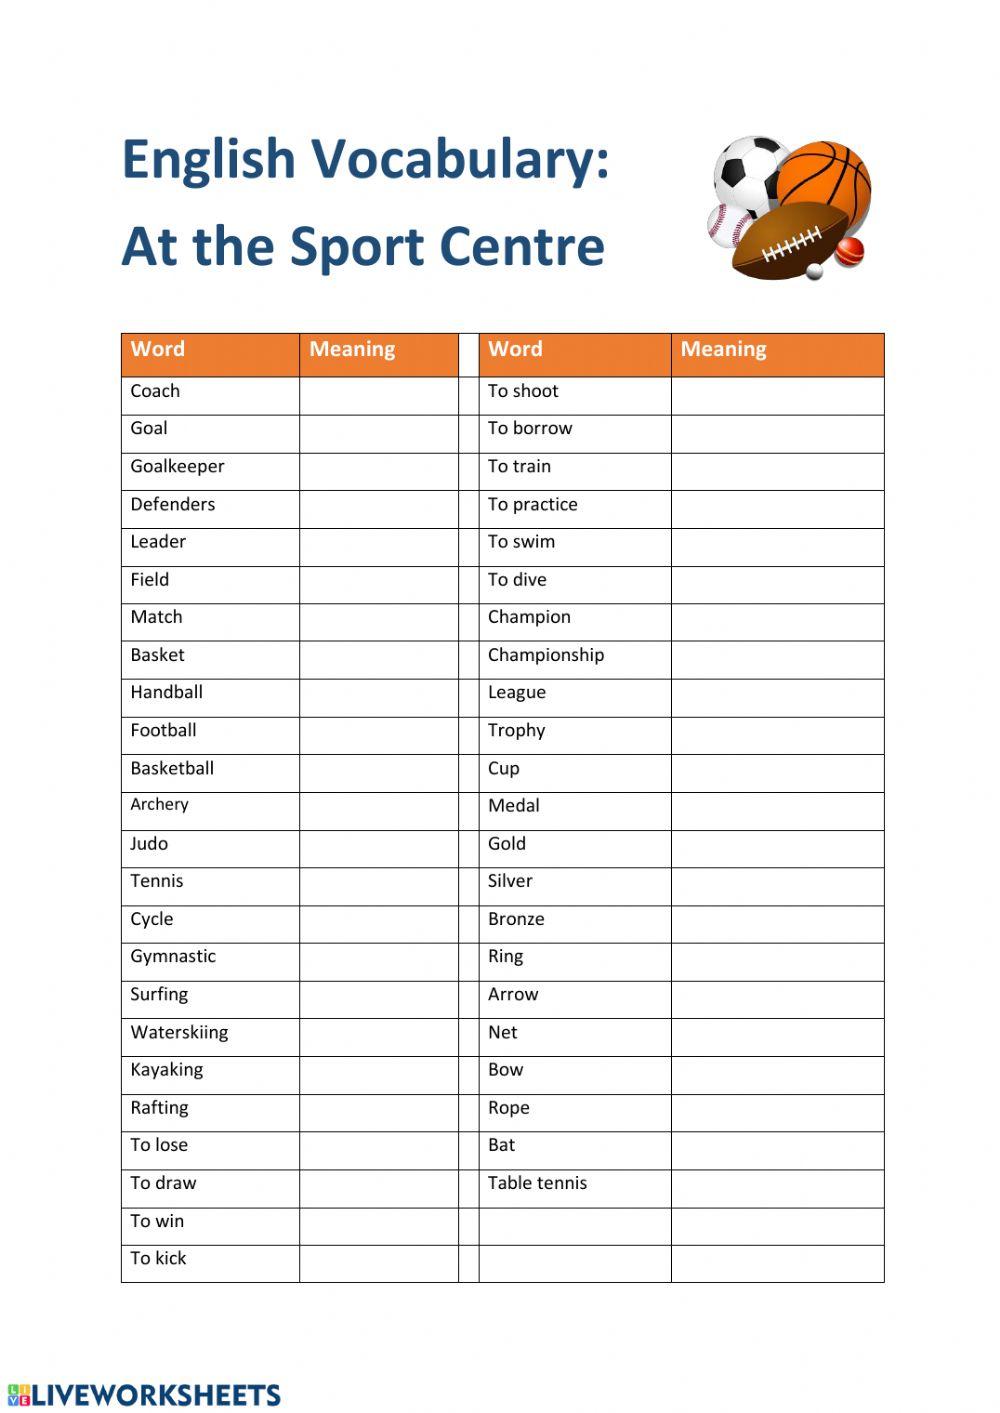 English Vocabulary: at the Sport Centre